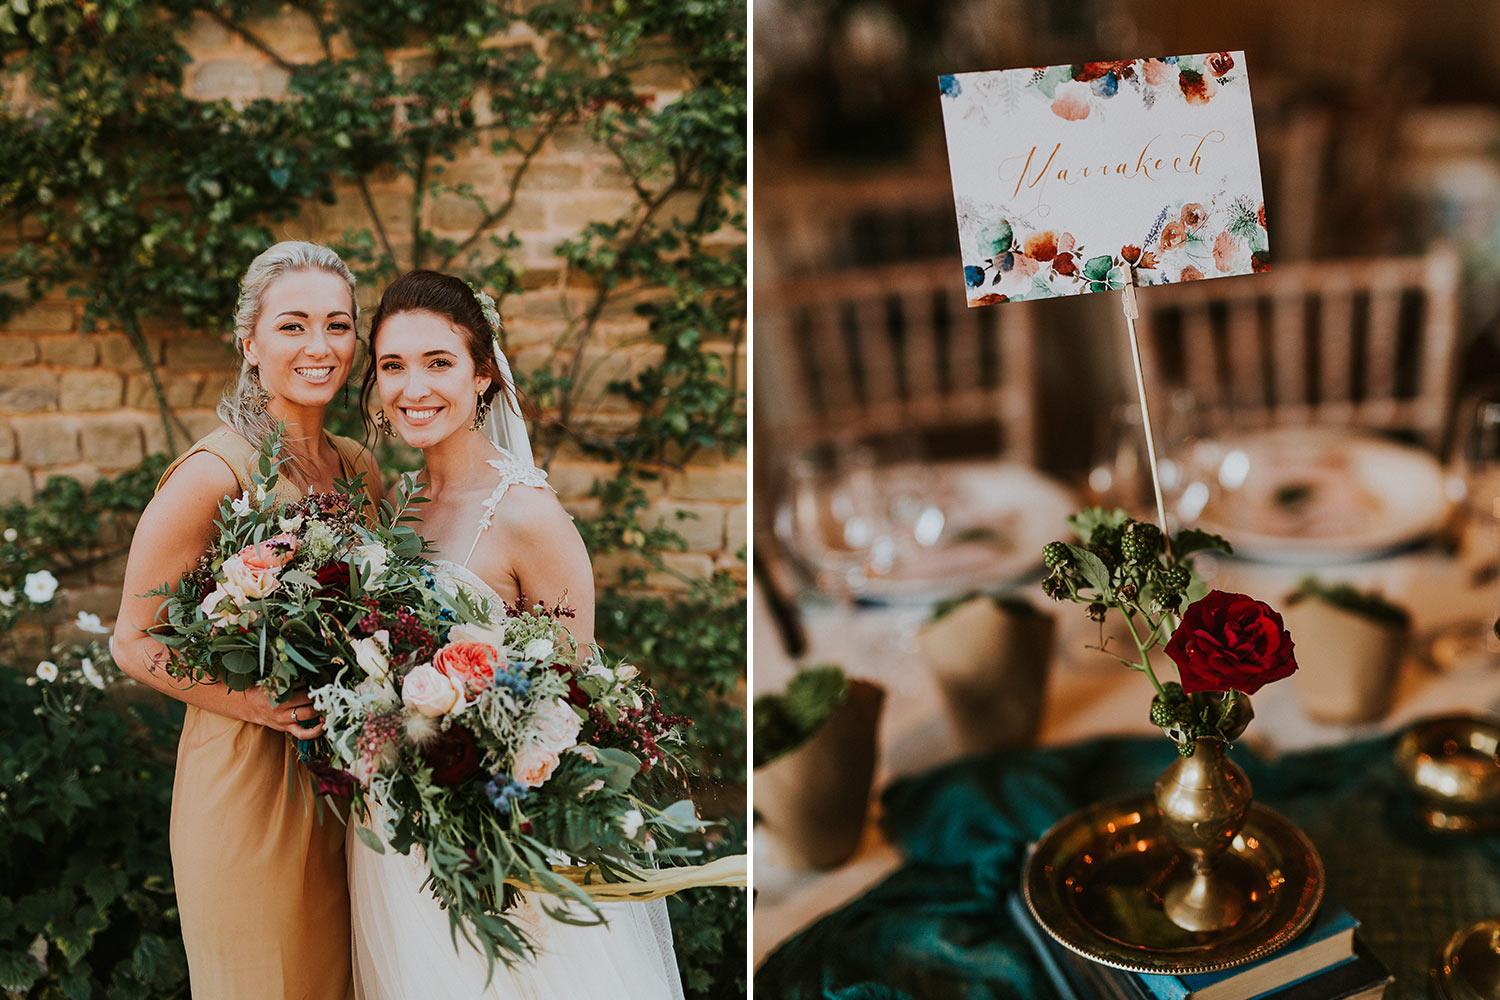 Nride and bridesmaid with woodland wedding flowers and table setting